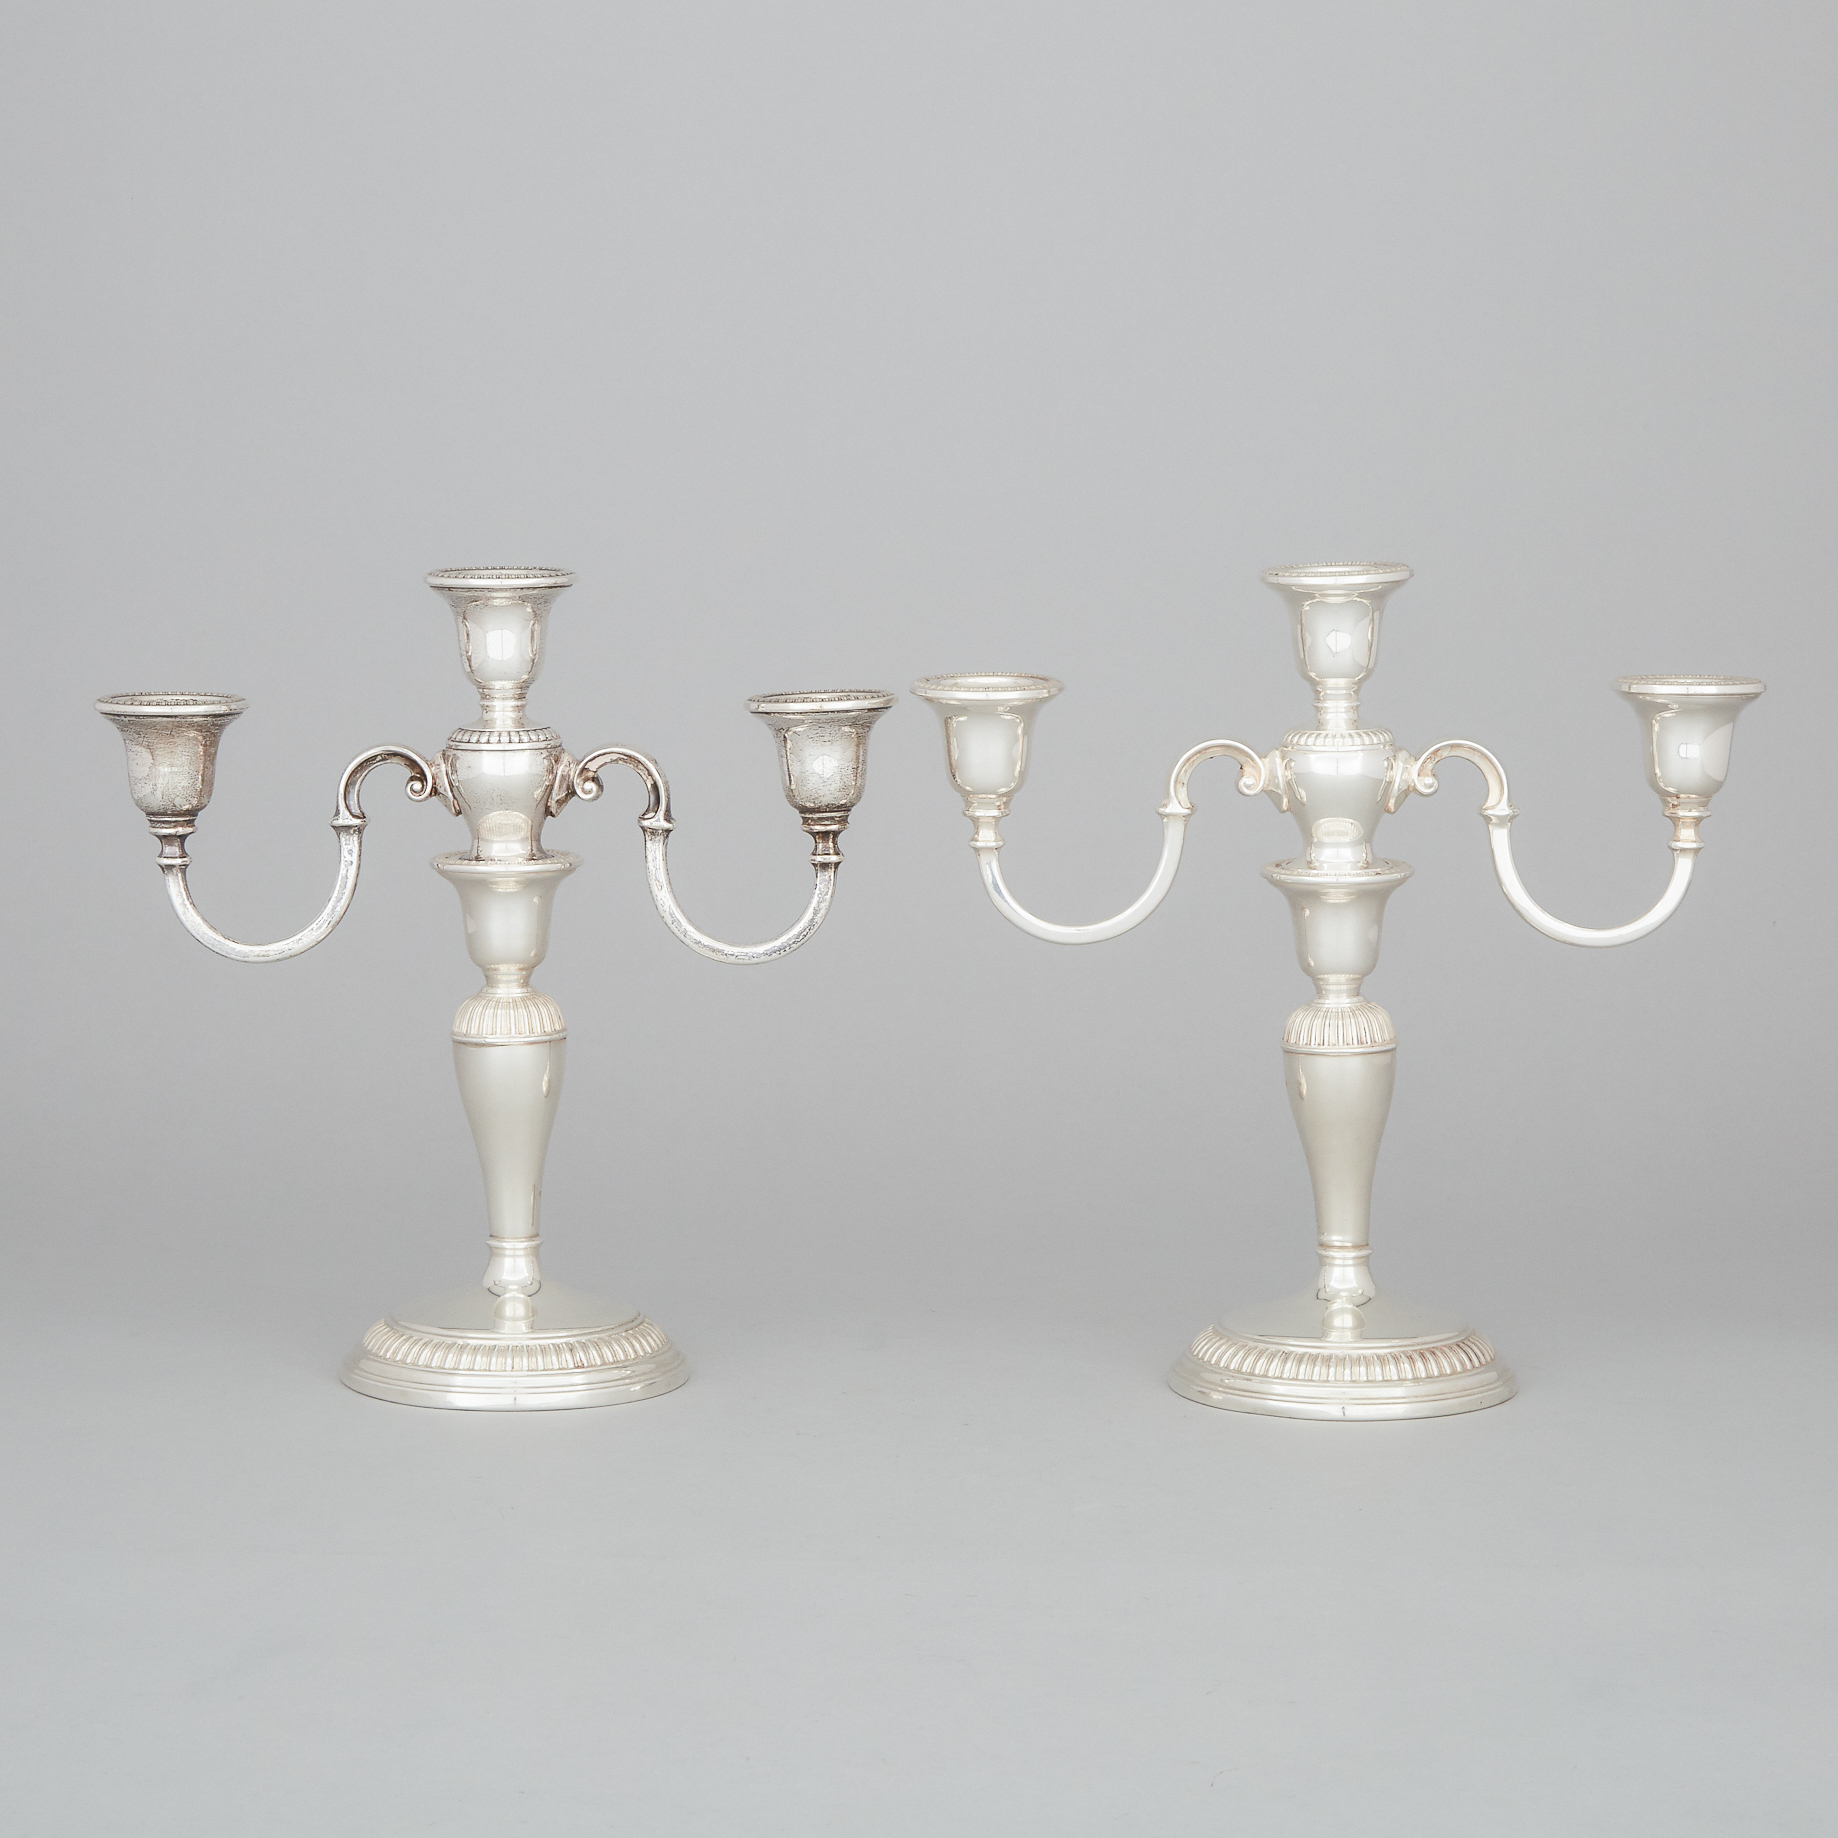 Pair of Canadian Silver Three-Light Candelabra, Henry Birks & Sons, Montreal, Que., 1964/70